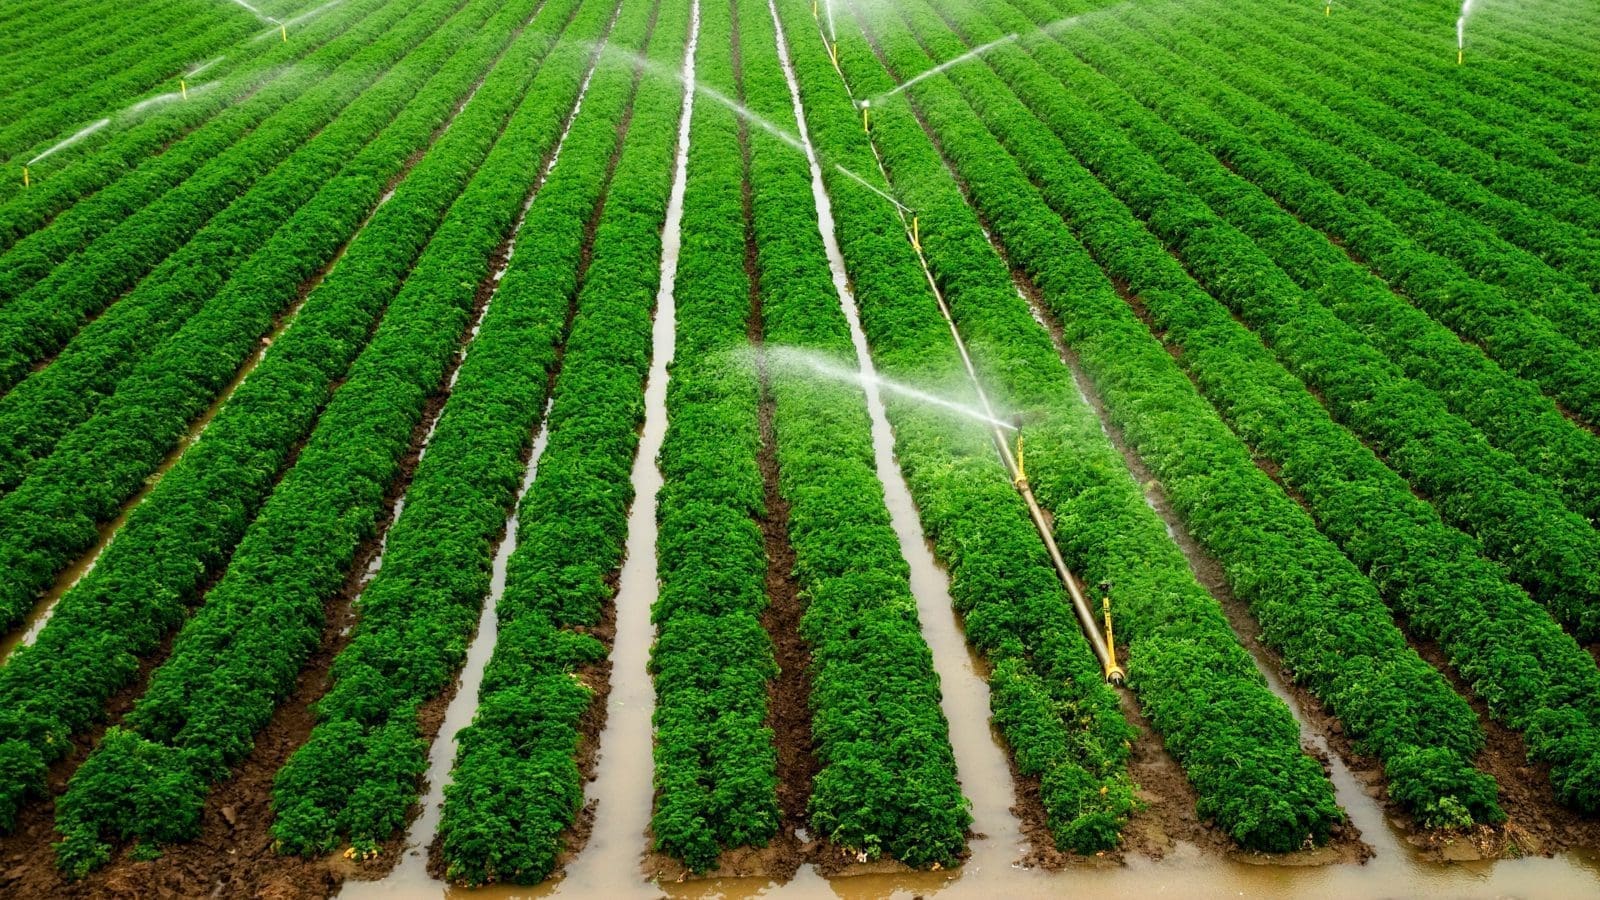 Morocco allocates more budget for irrigation programs to mitigate the effect of dwindling water resources